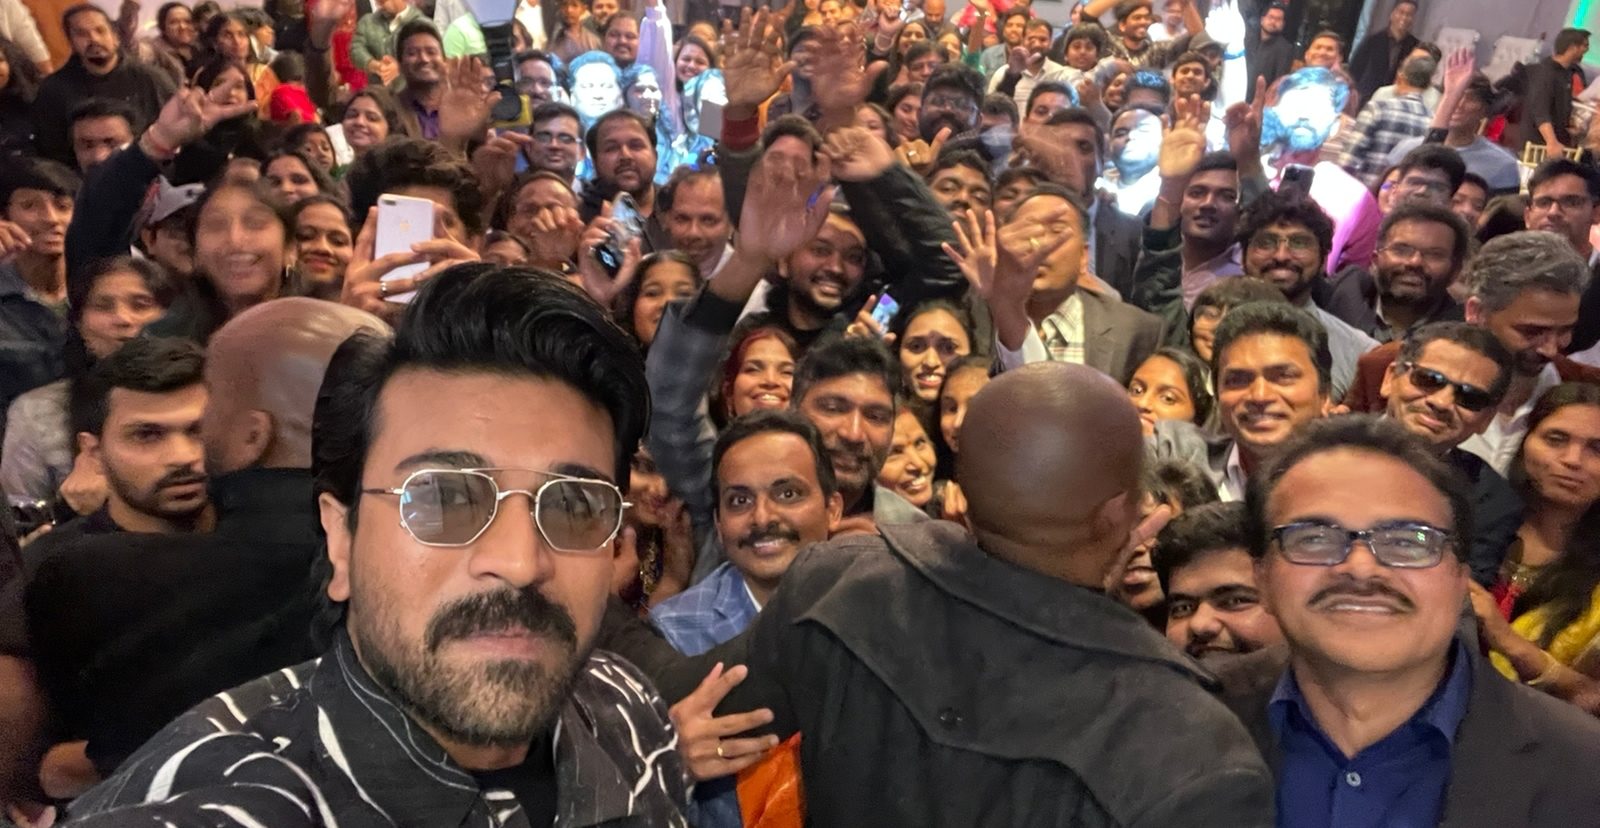 Mob-Selfie by ‘Global Star’ Ram Charan with thousands of fans in LA post a screening of RRR!